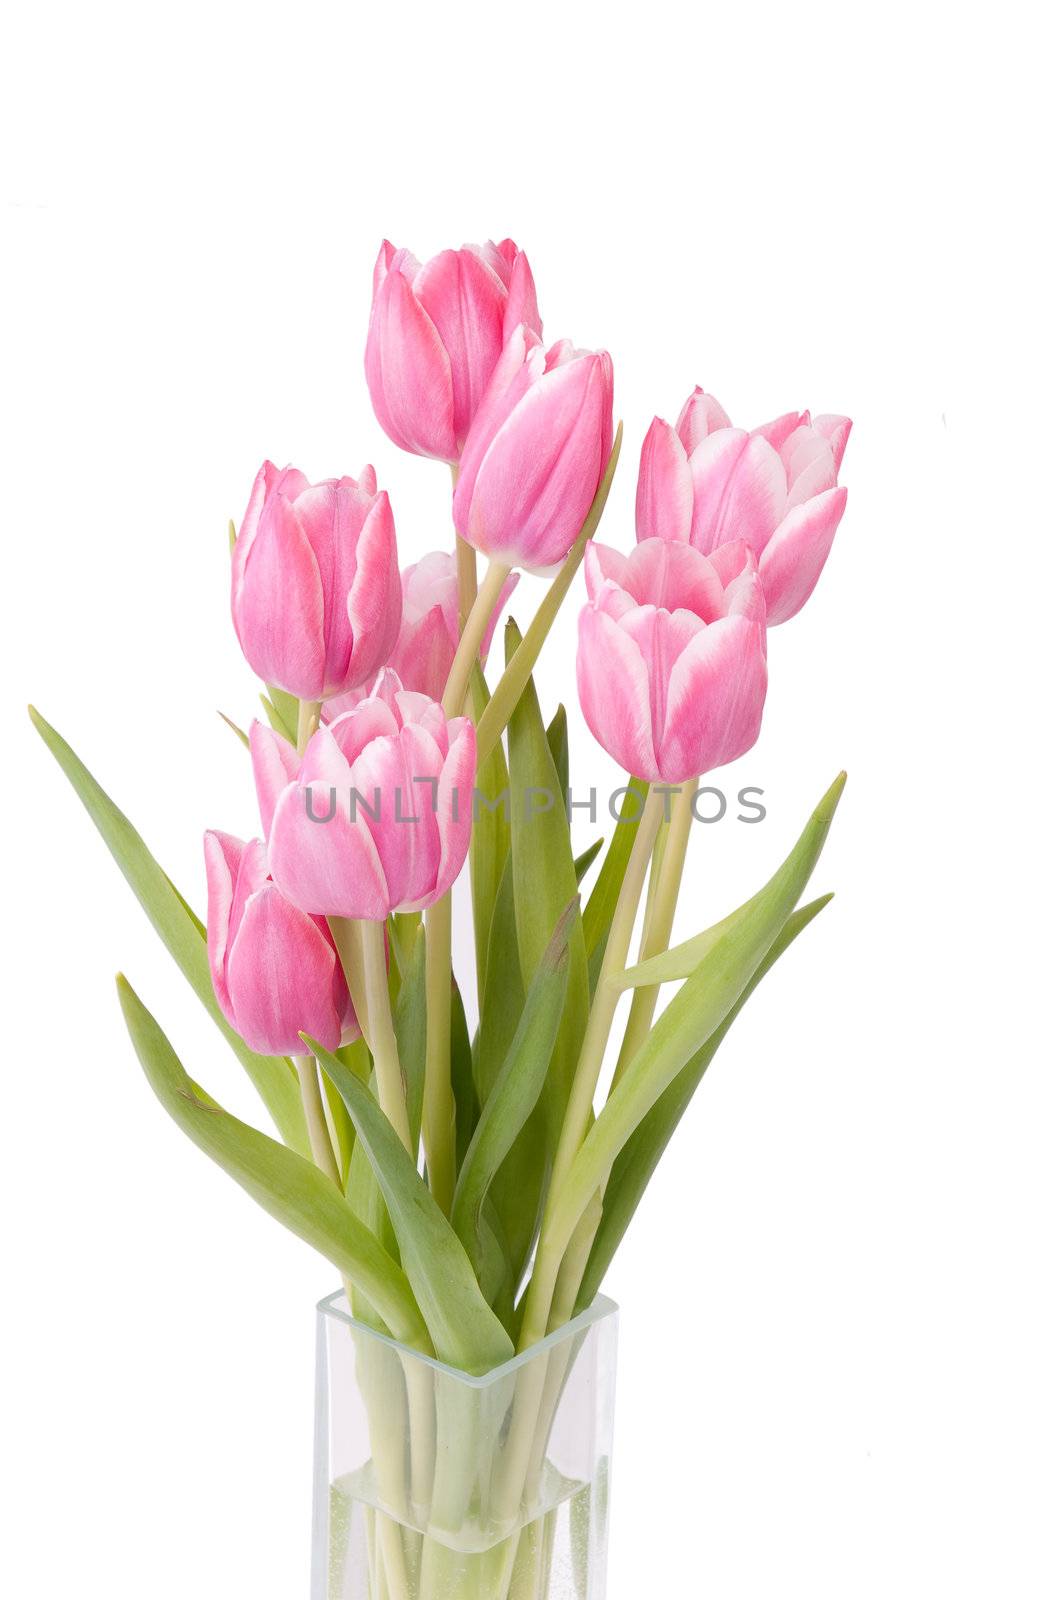 Zoom on a bunch of Tulips in a vase by bigmagic